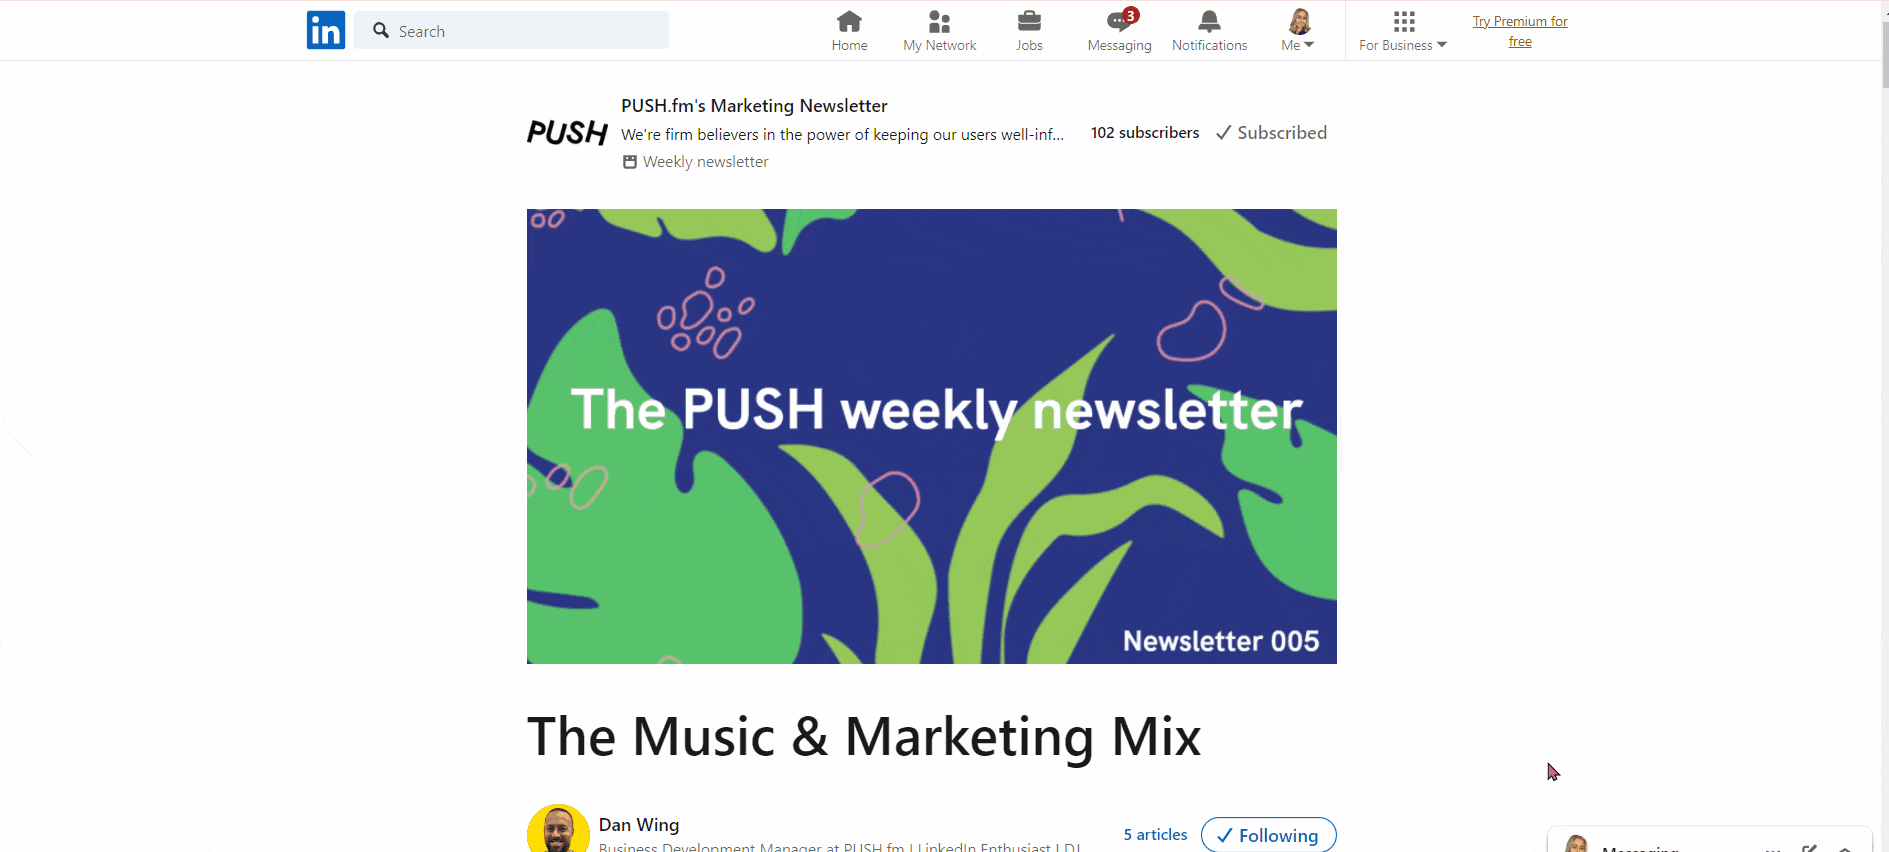 3 reasons why you should subscribe to newsletters. PUSH.fm newsletter GIF.